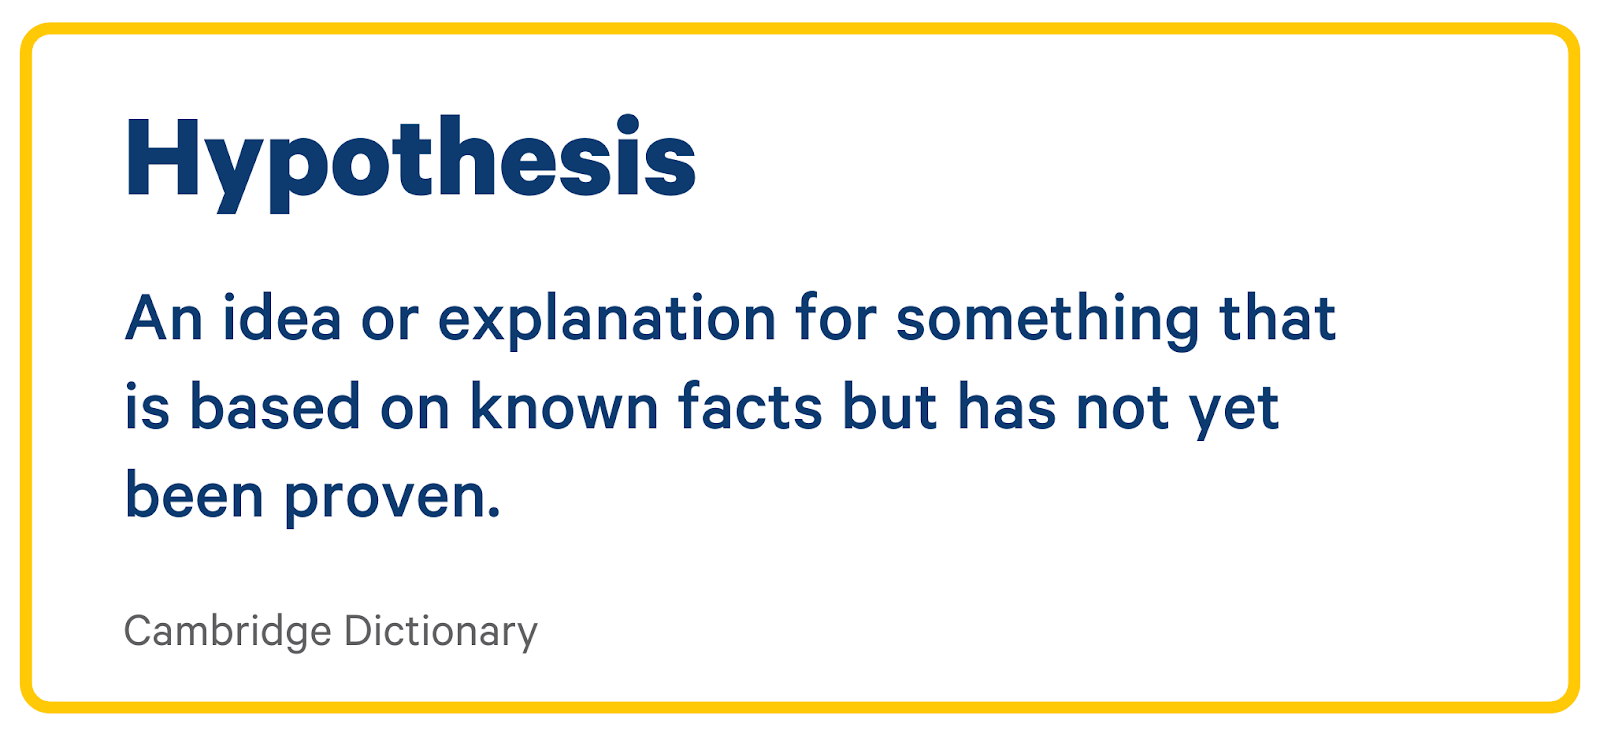 hypothesis definition: an idea or explanation for something that is based on known facts but has not yet been proven